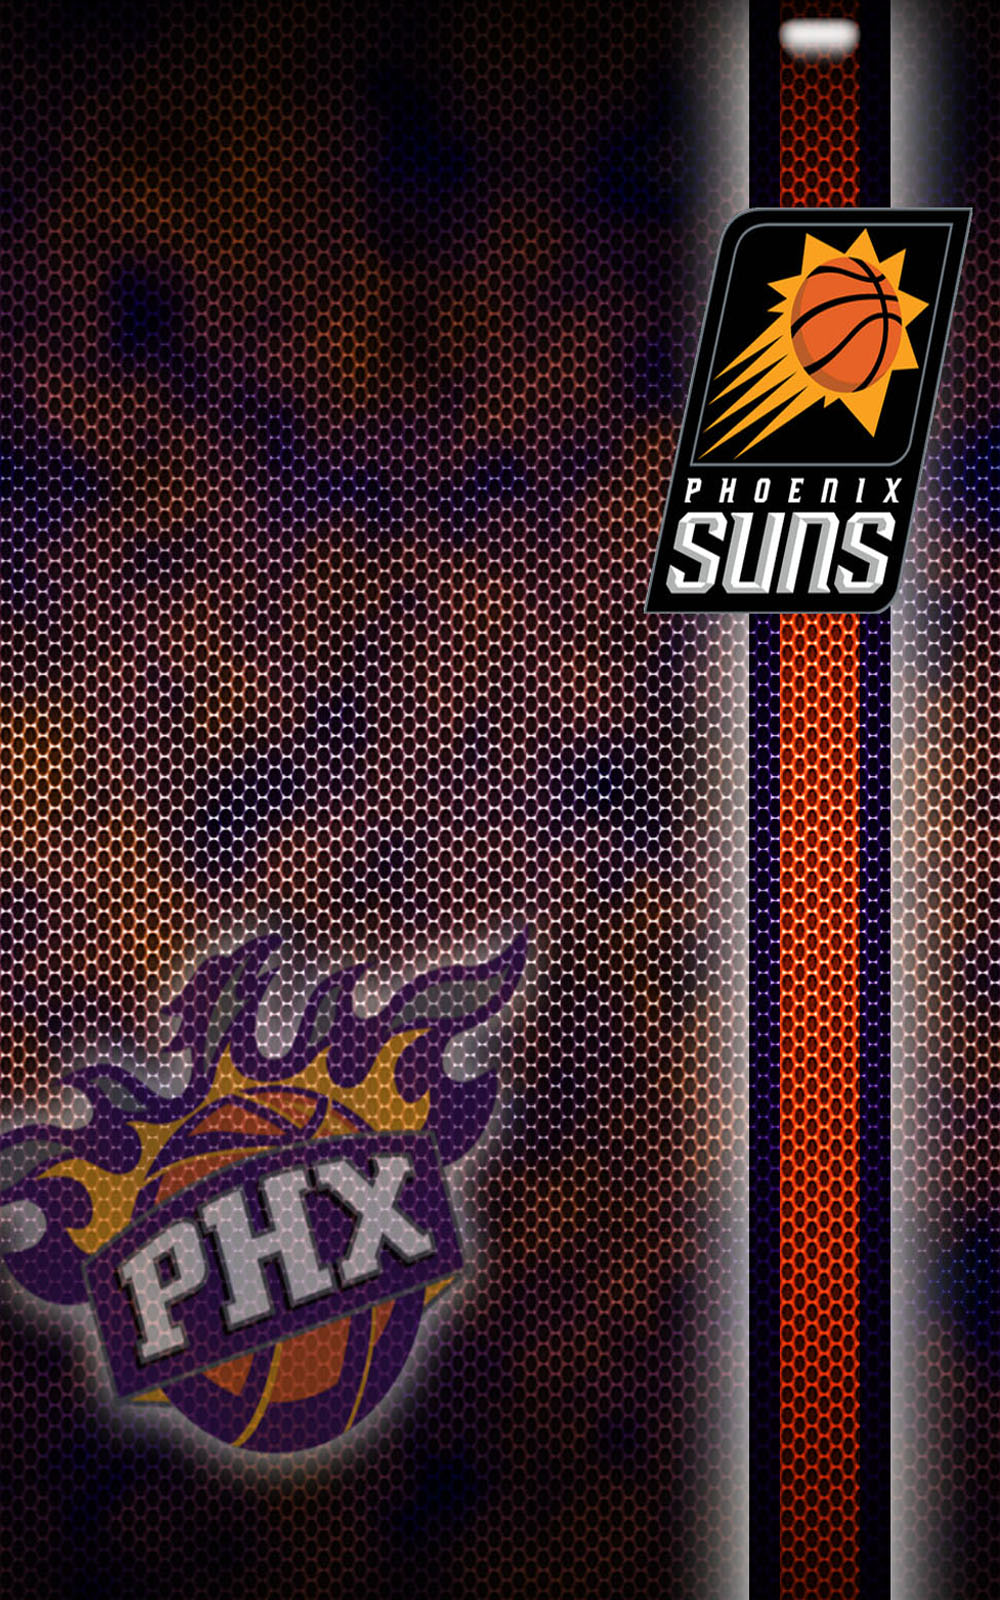 Phoenix Suns Download Free Hd Mobile Wallpapers